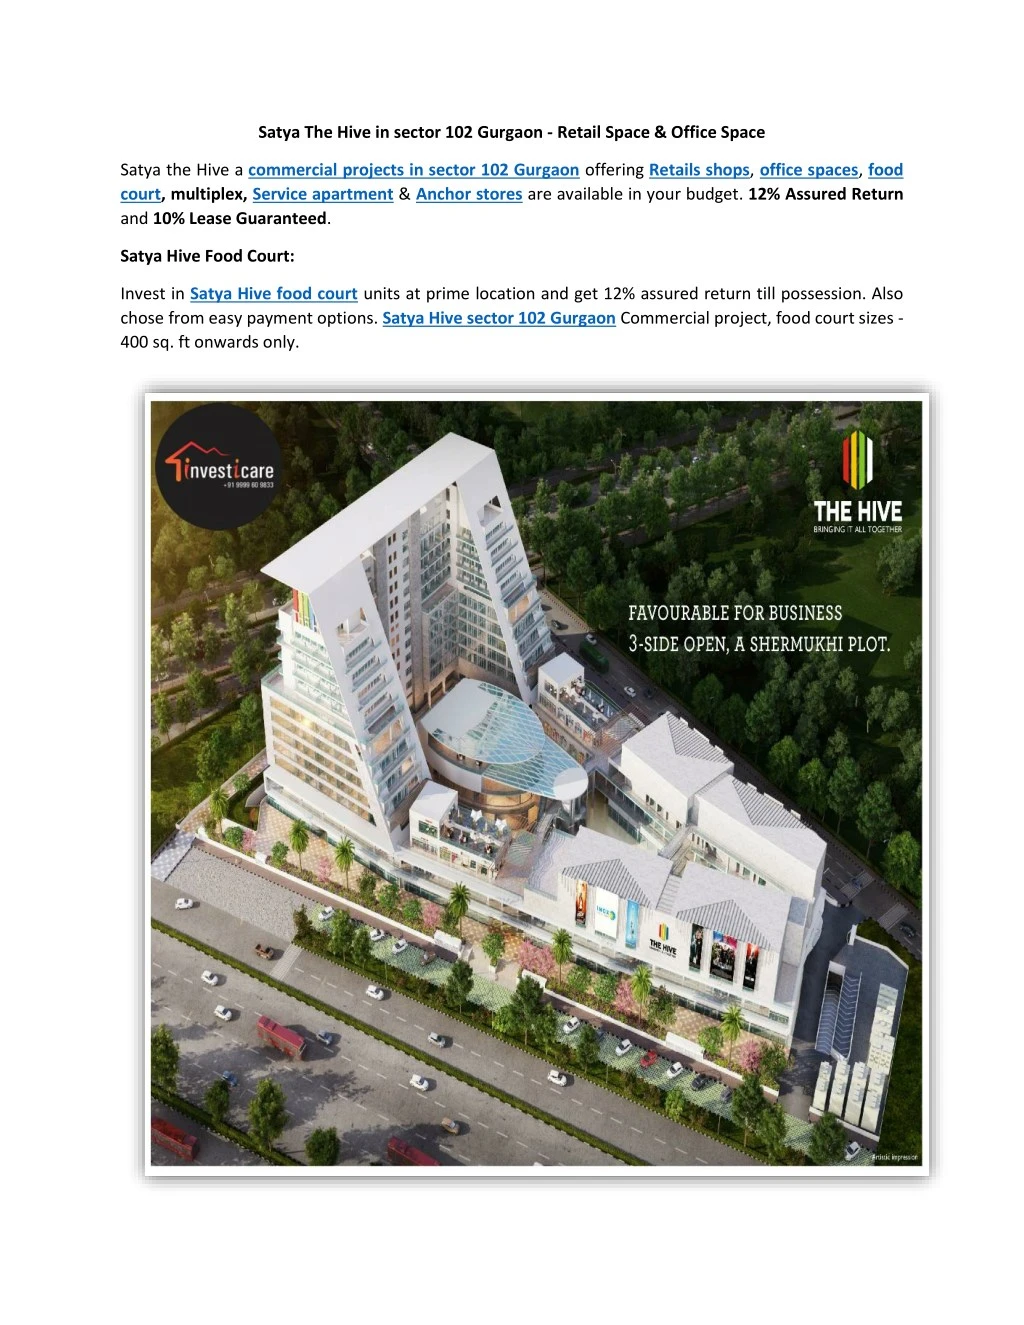 satya the hive in sector 102 gurgaon retail space